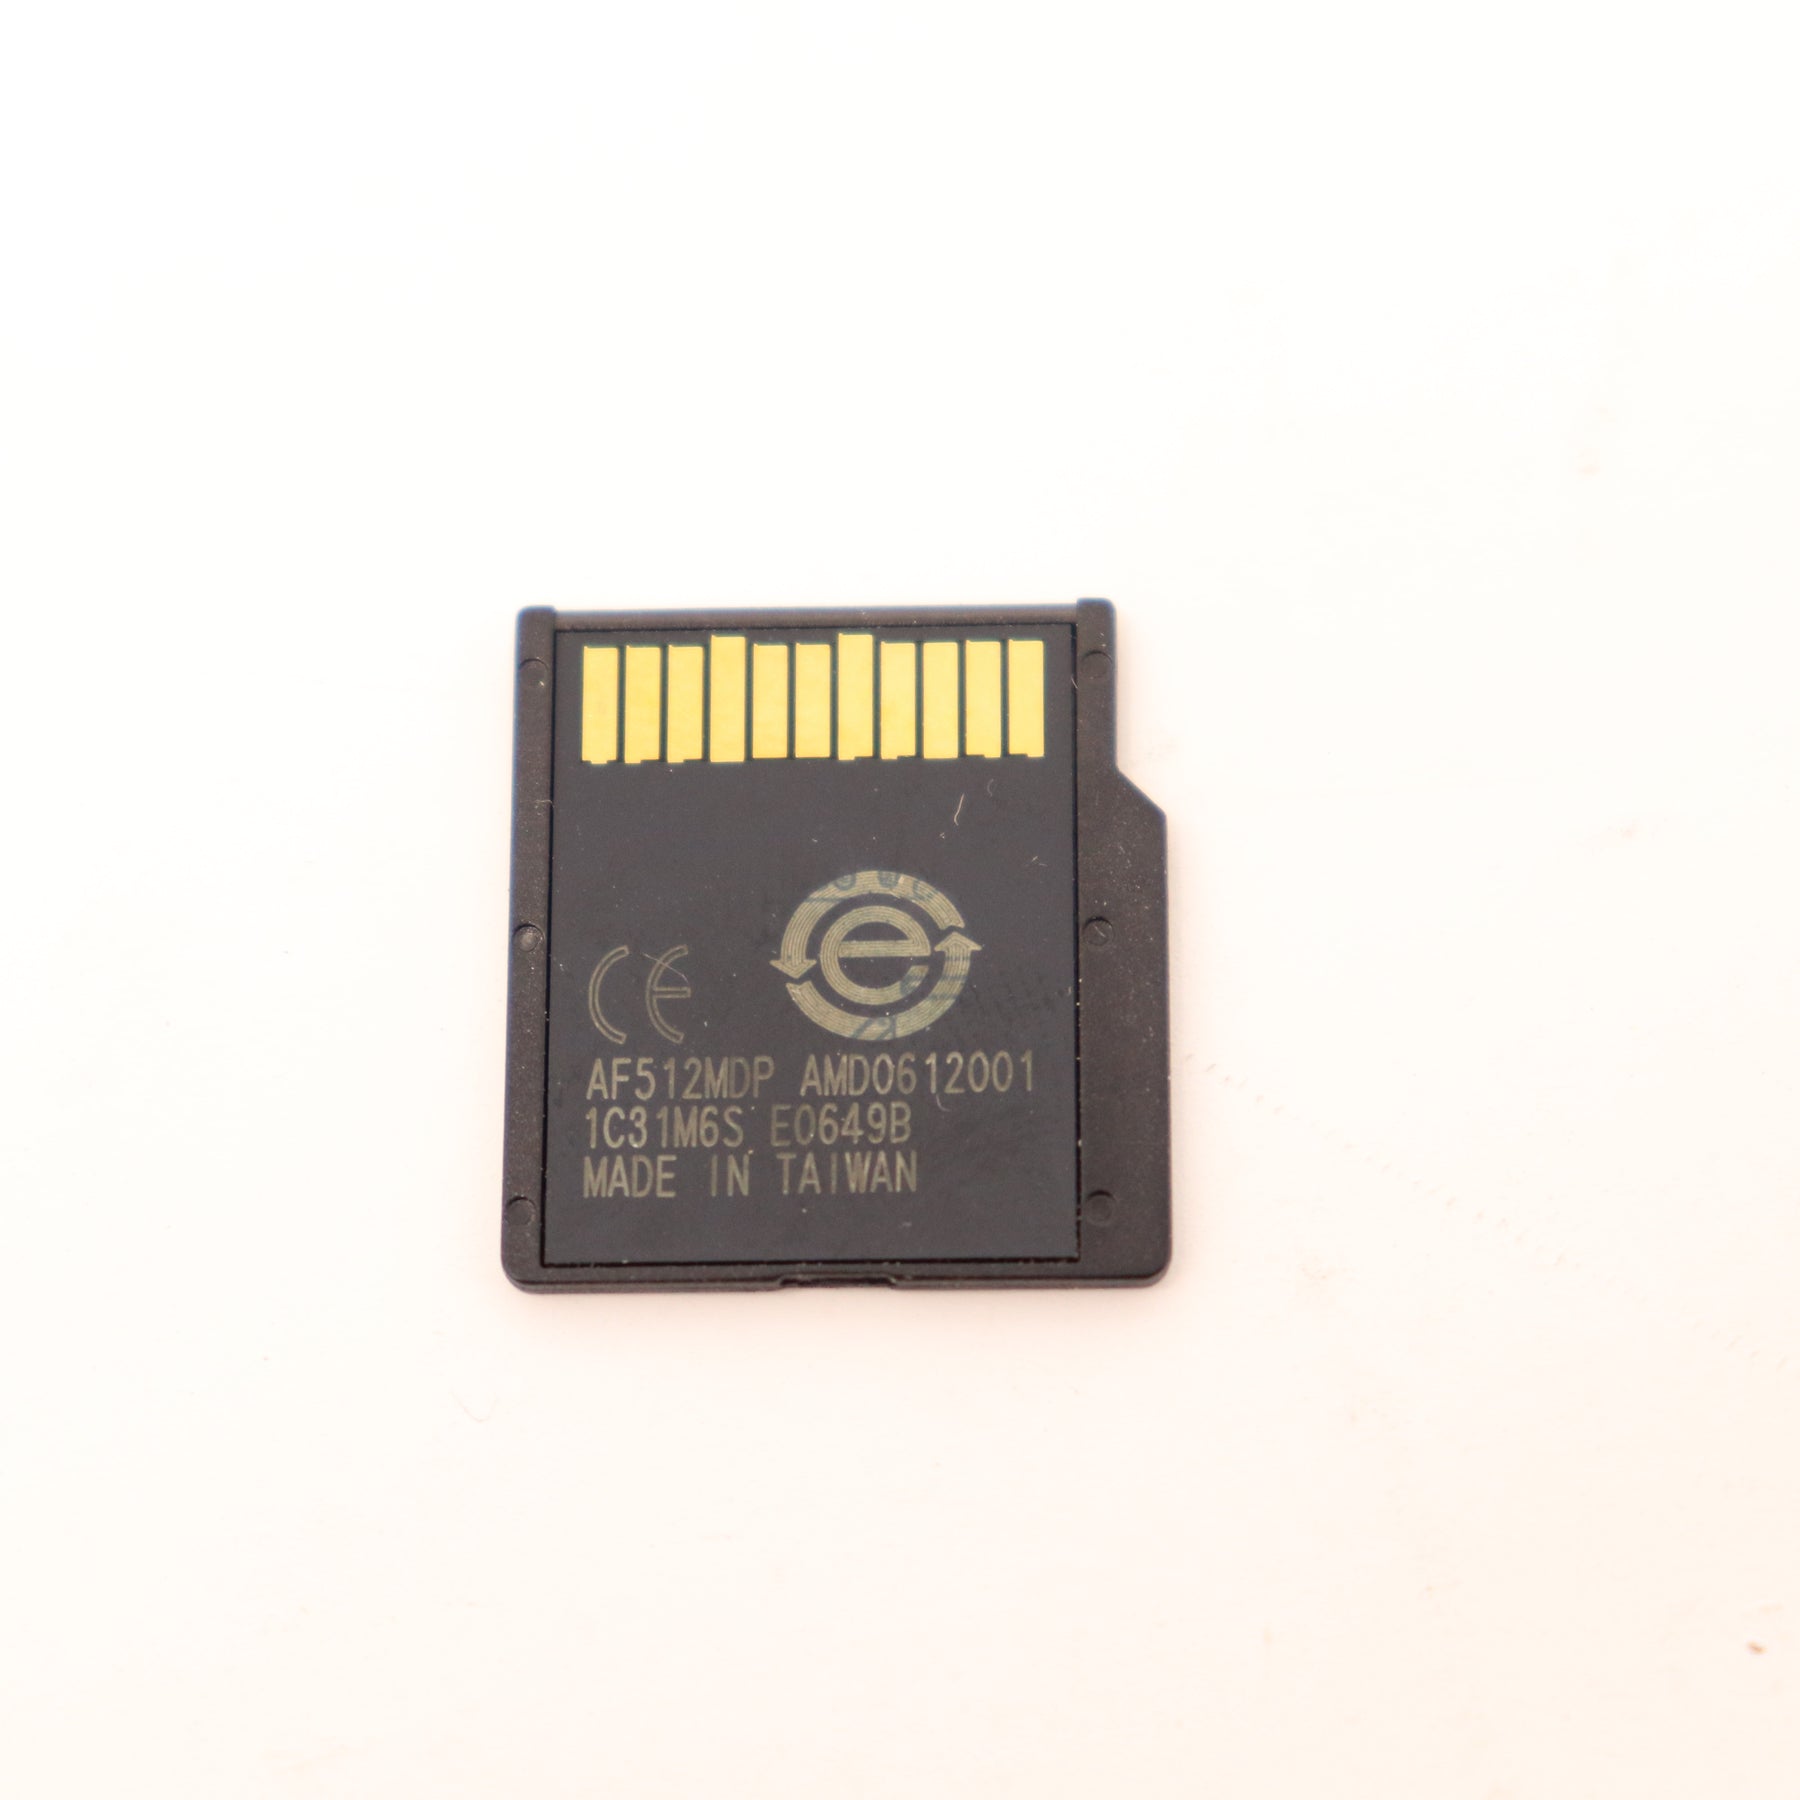 512MB MiniSD Memory Card For Phones Other Portable Devices Scanners Sticks Mini SD